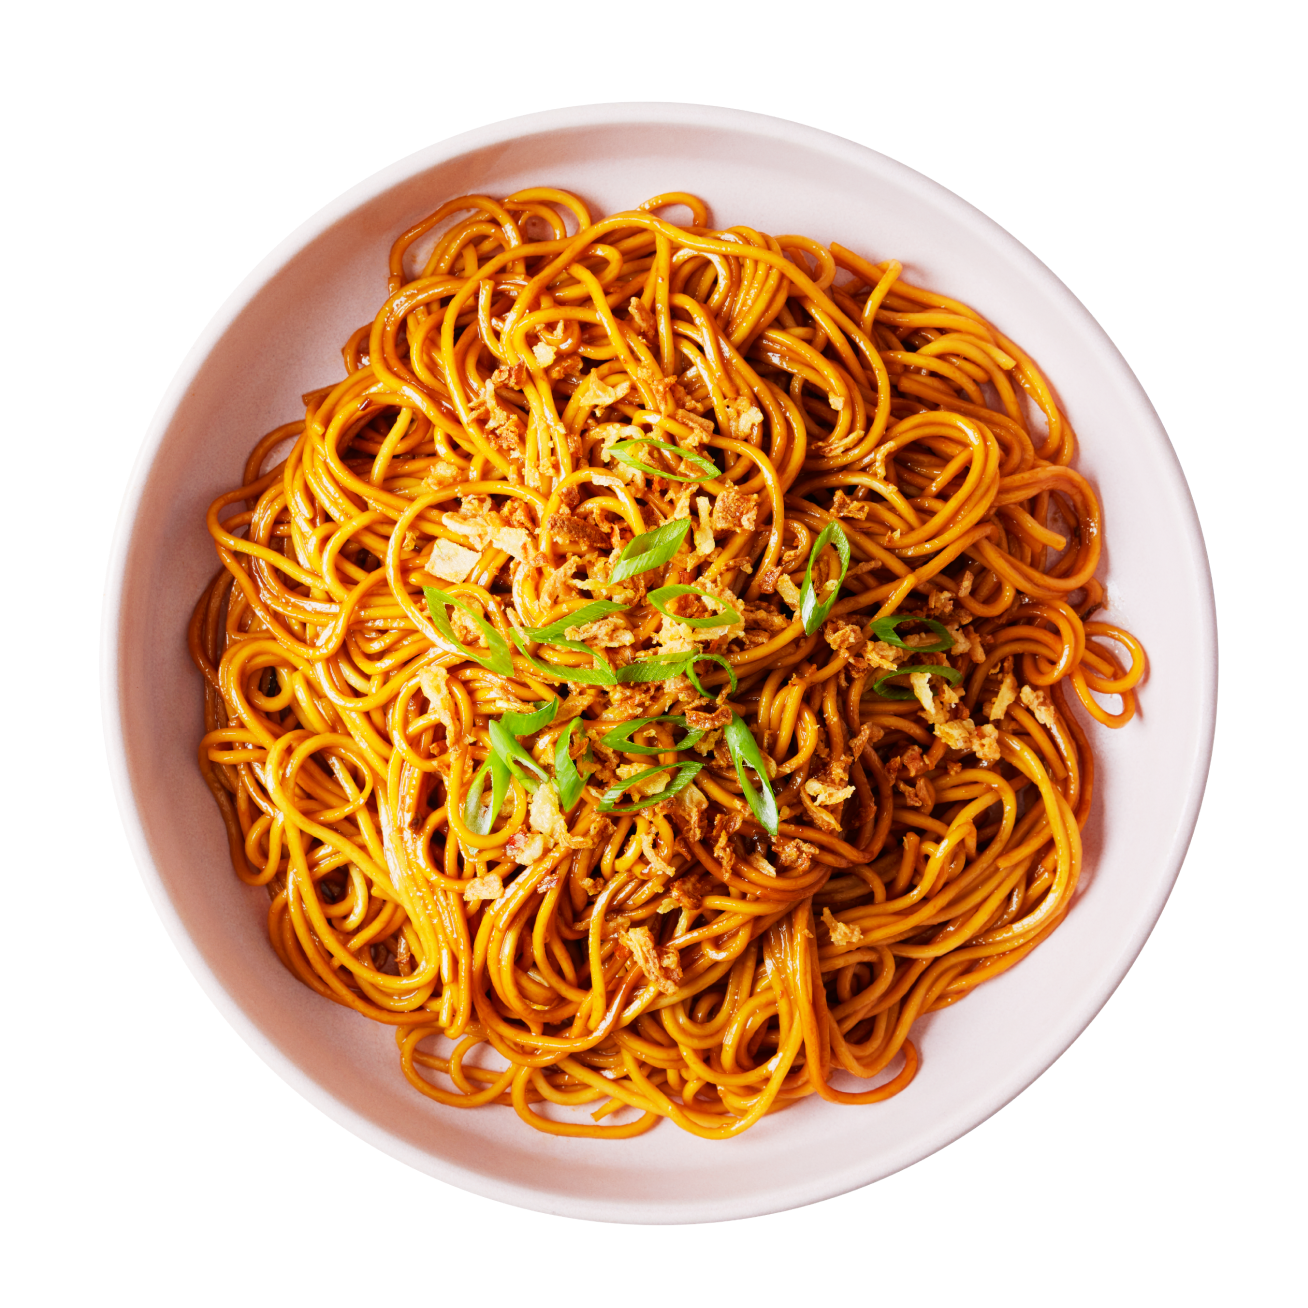 Shanghai Scallion Oil Noodle / Impossible™ Meat Made From Plants